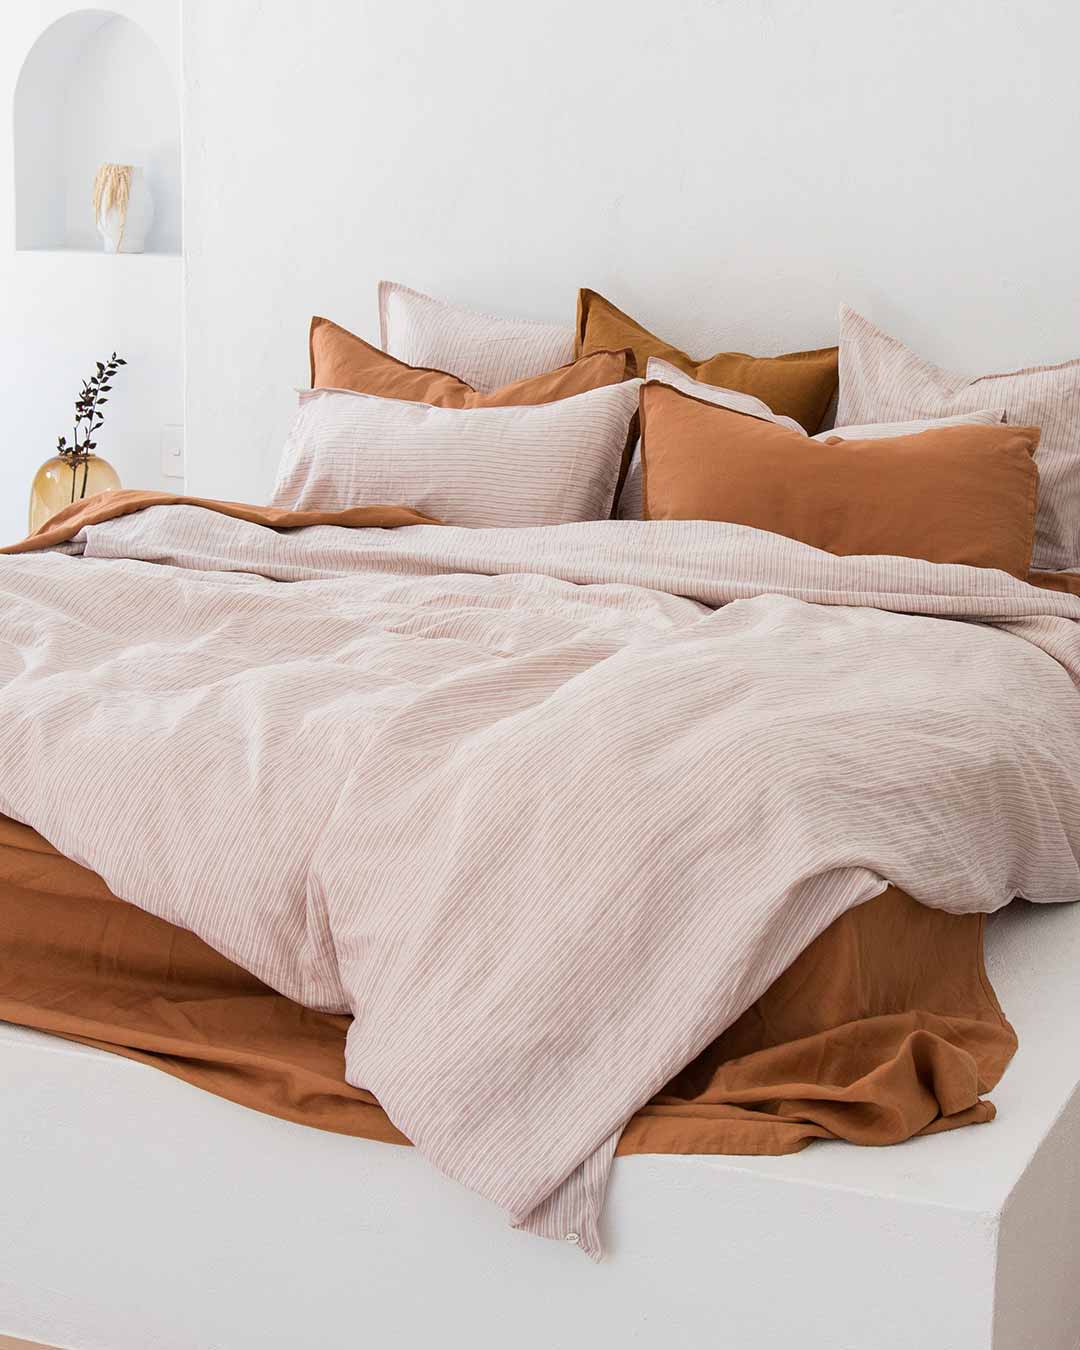 The Sheet Society Bed Sheets Worth Dreaming About